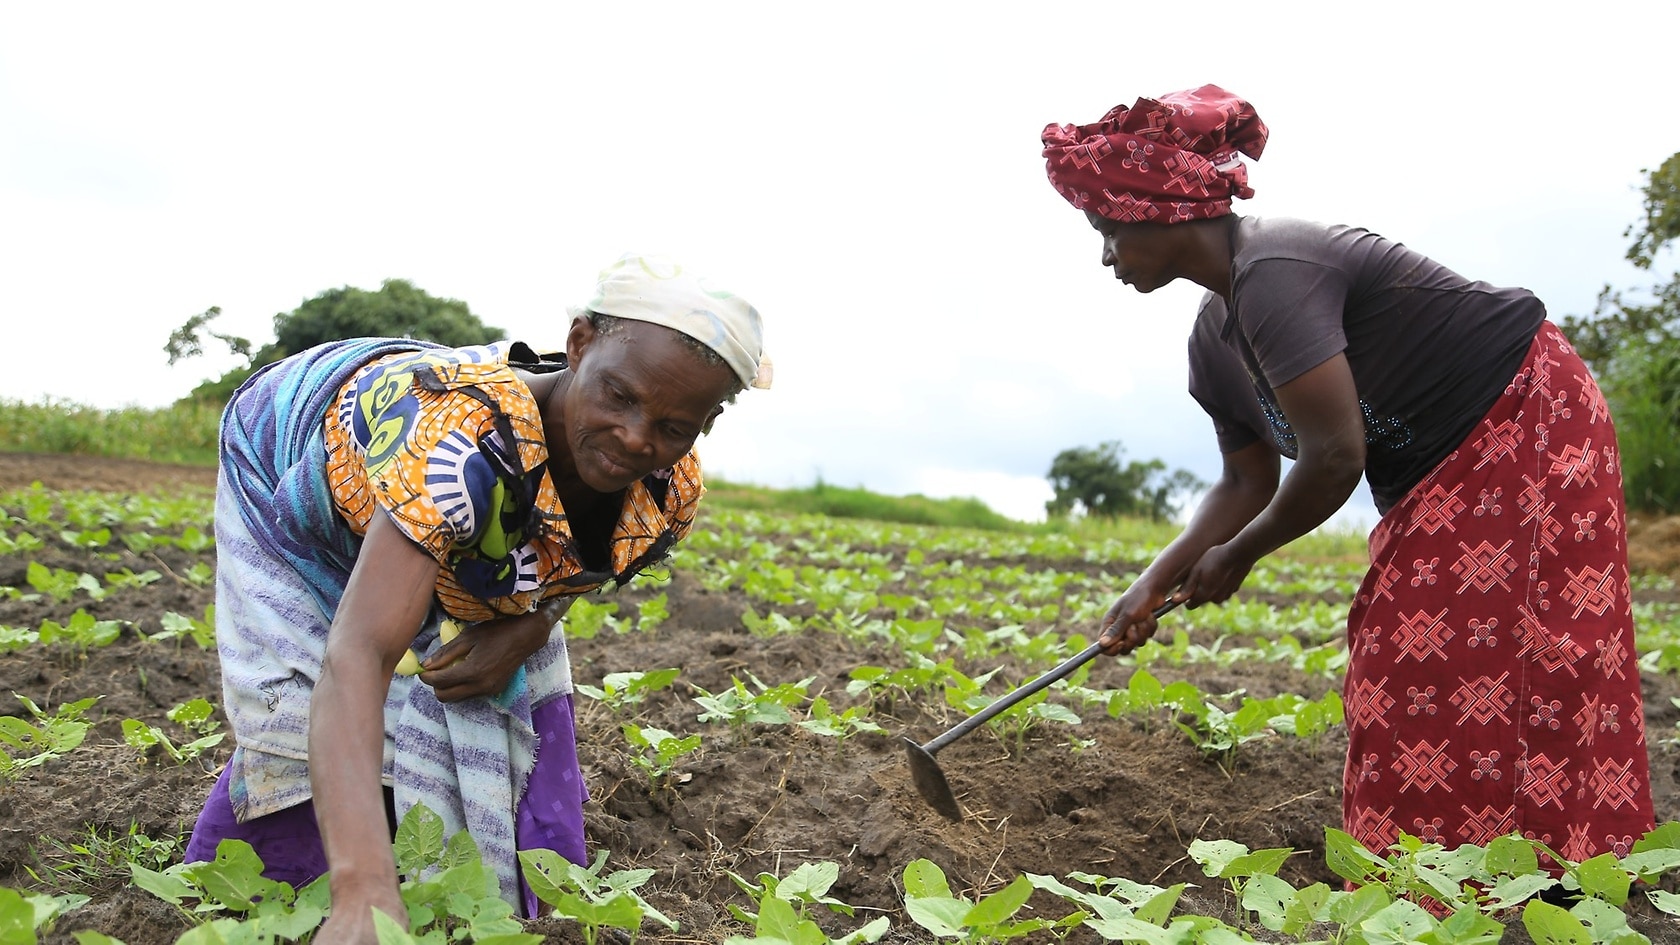 With sustainable agriculture projects, alternative livelihoods are created especially for women.